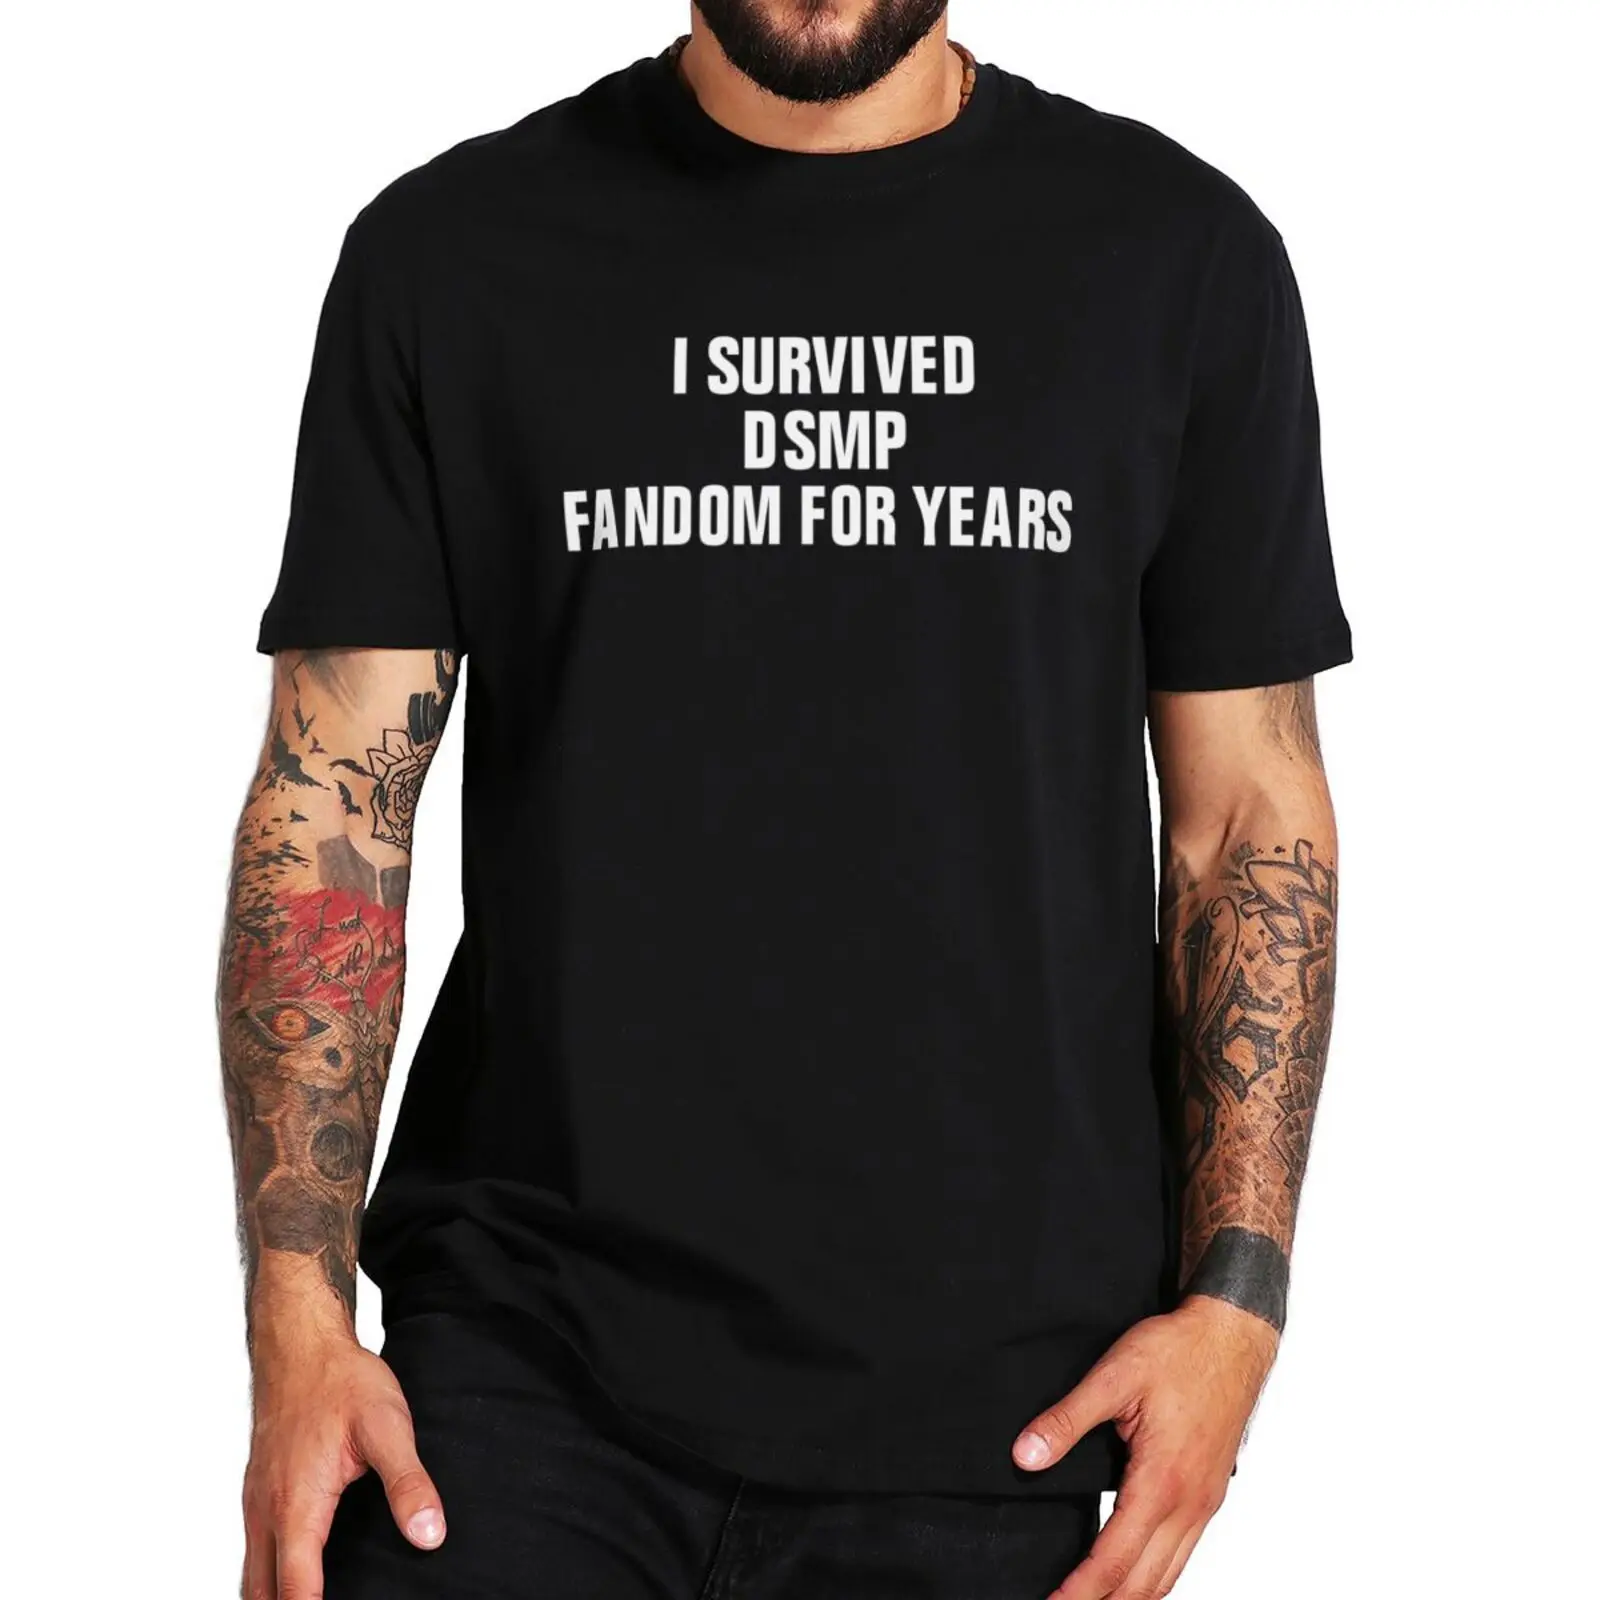 

I Survived DSMP Fandom For Year T Shirt Funny Video Game Humor Y2k Tee Tops 100% Cotton Soft Unisex T-shirt EU Size